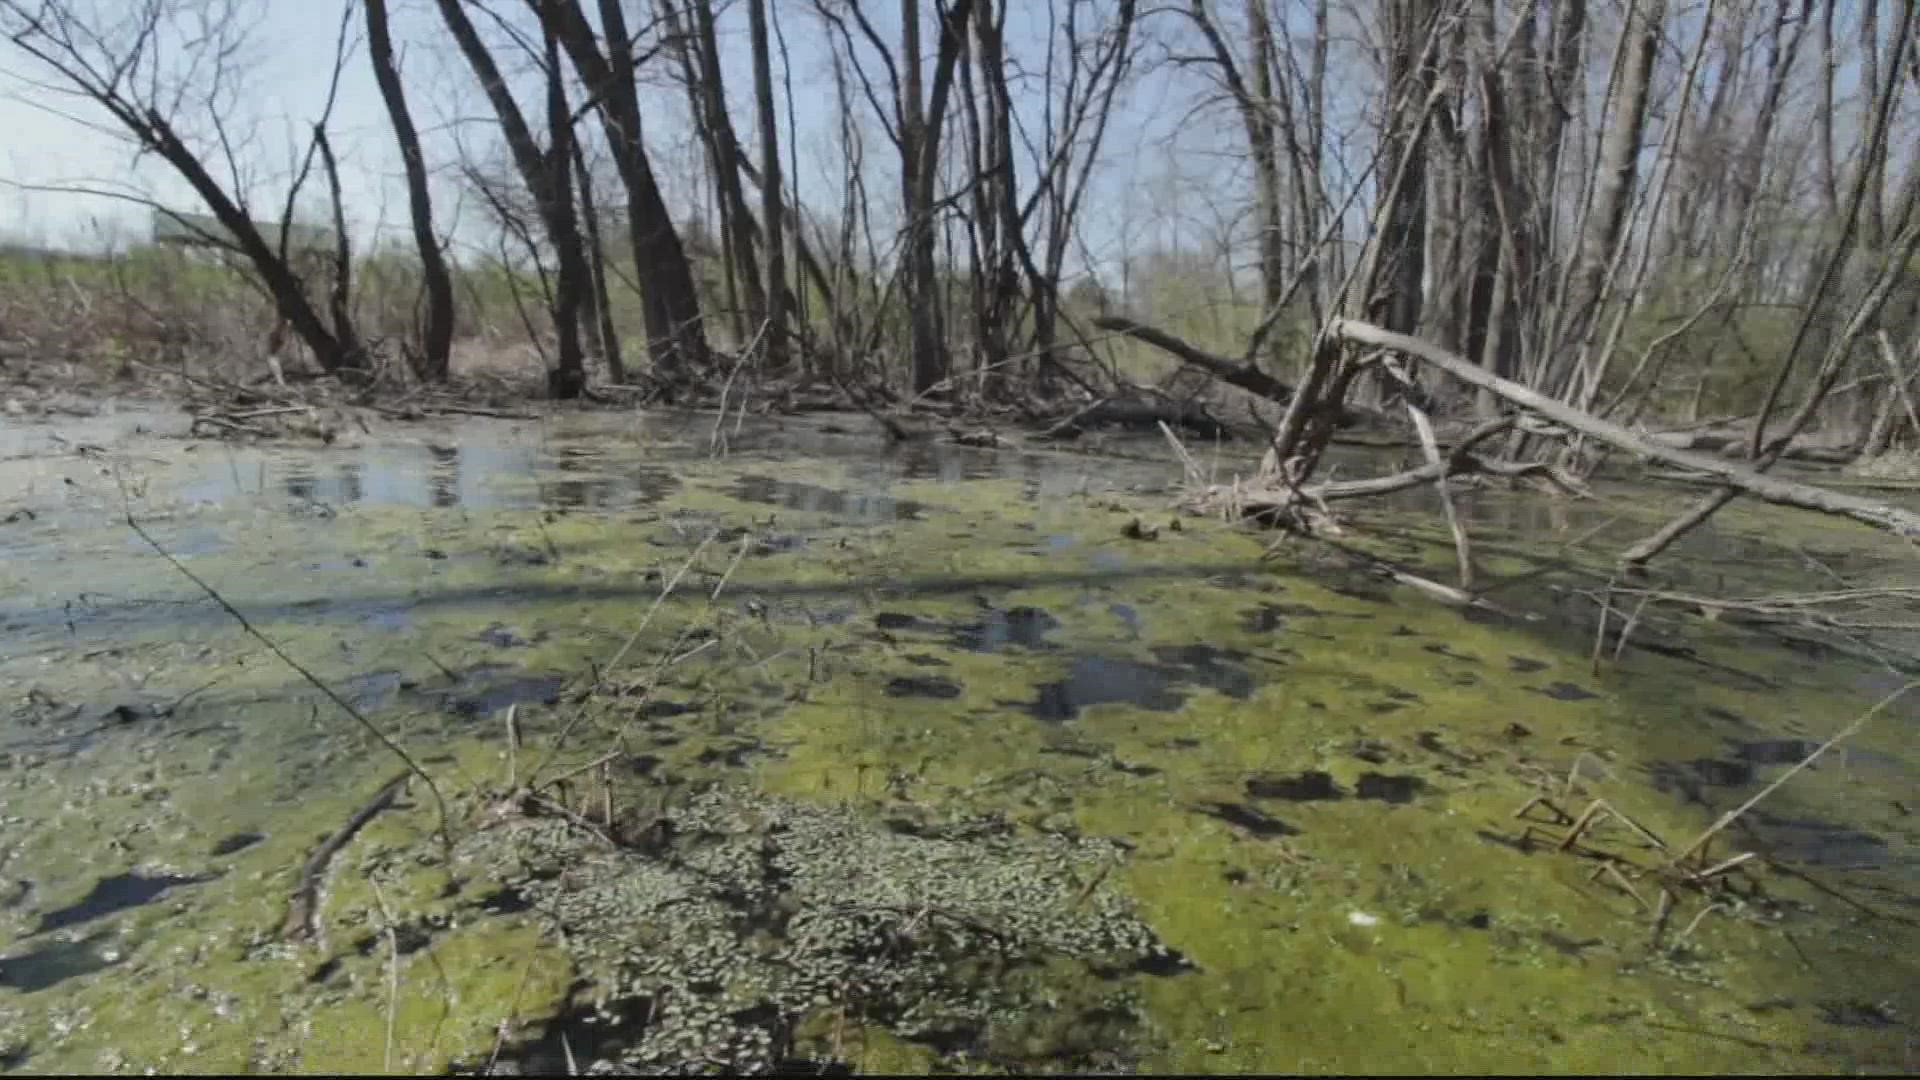 Officials said the algae bloom is in parts of Orange, Louisa and Spotsylvania counties.